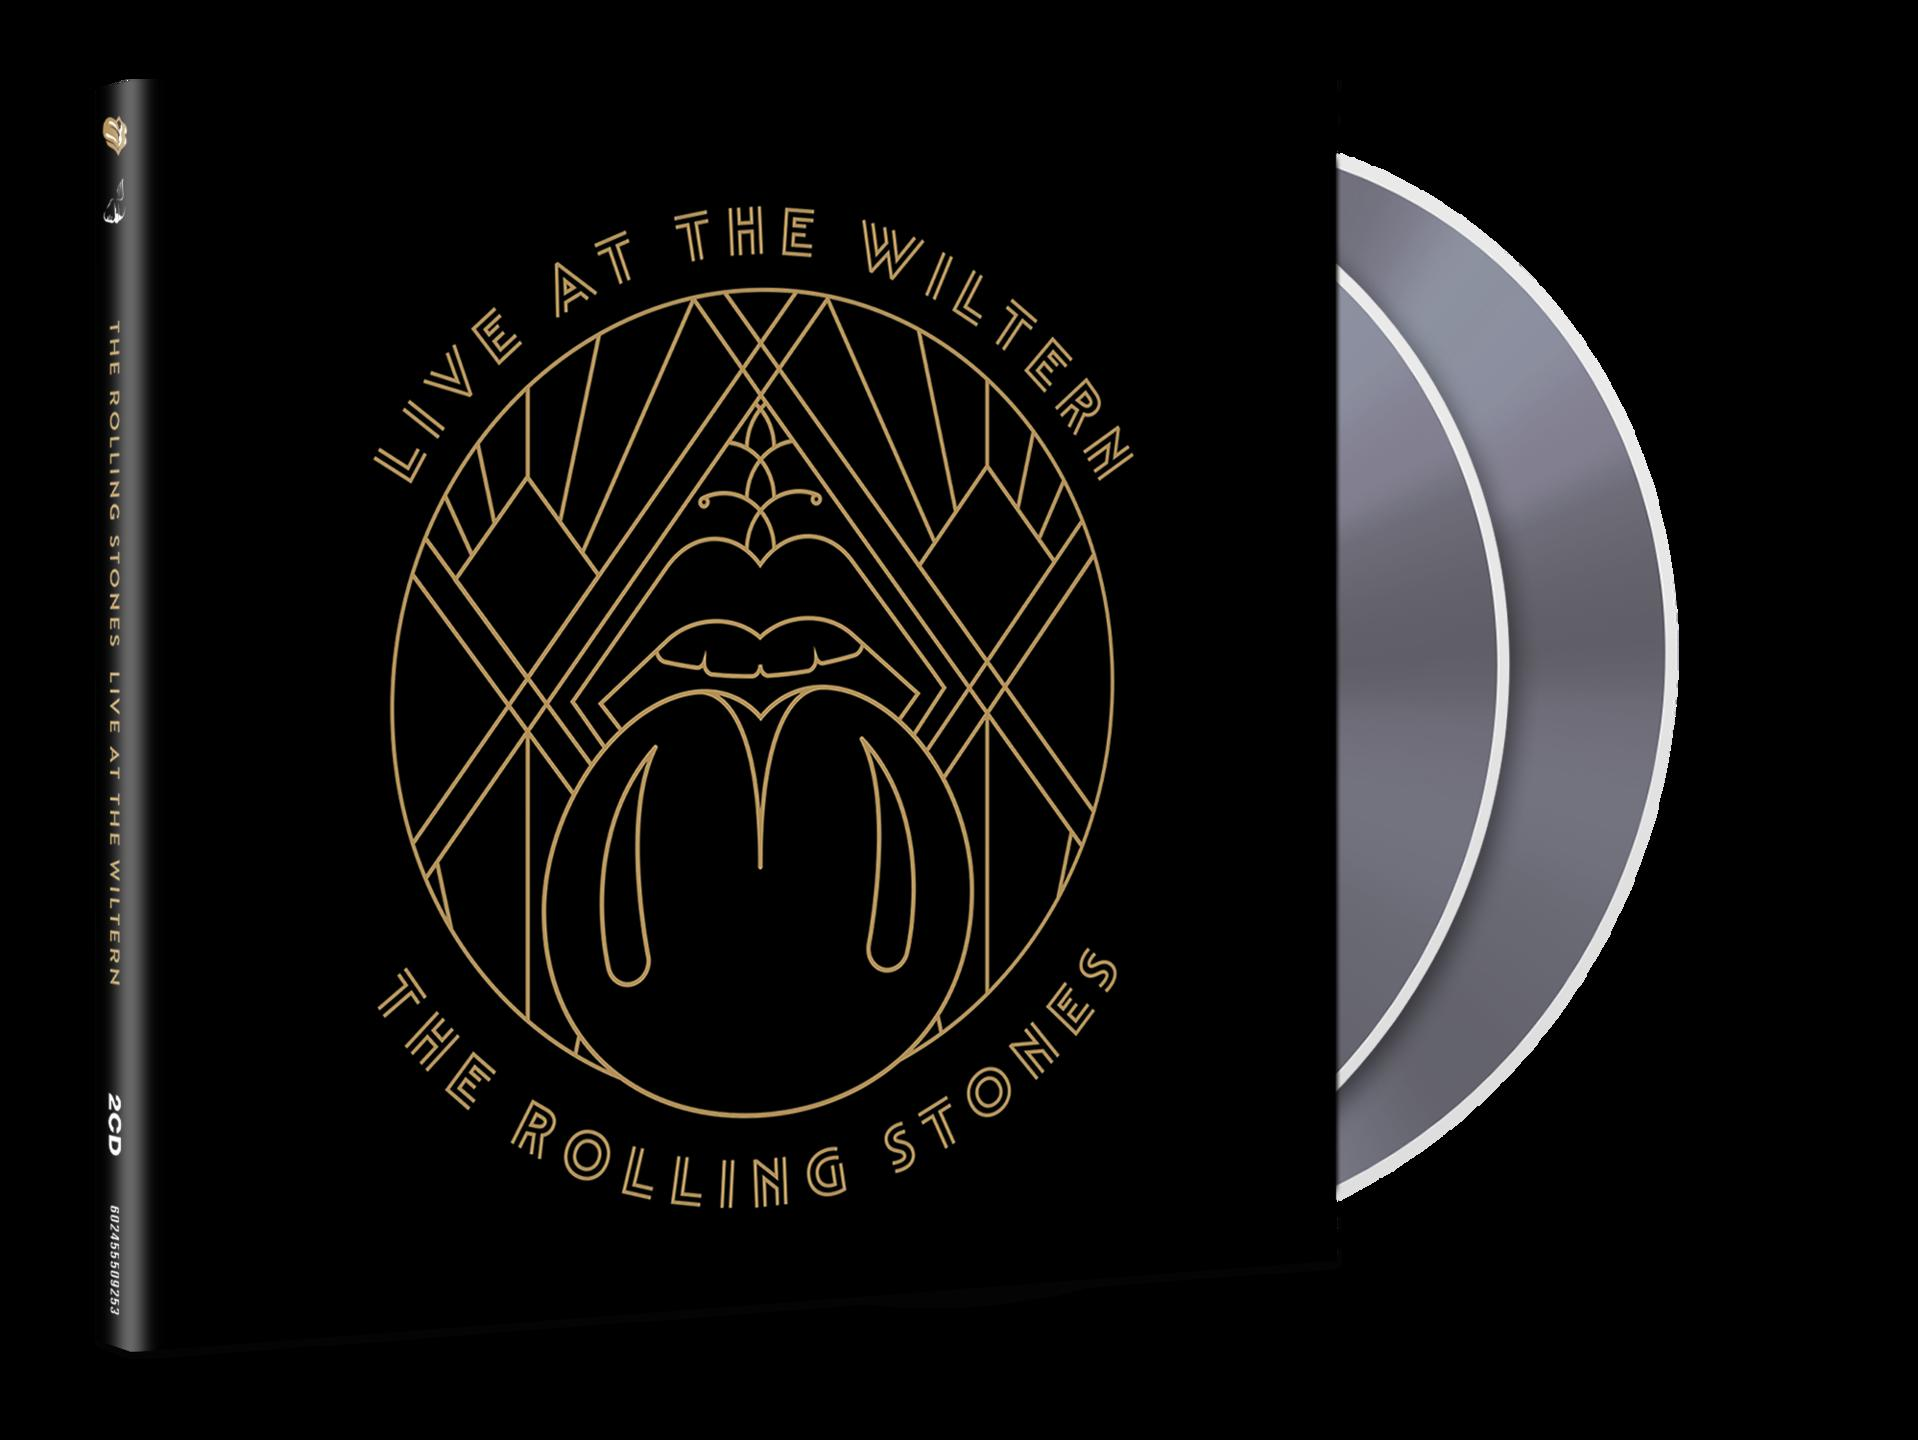 The Rolling Stones - Live (CD) (Los Angeles 2CD) / Wiltern - the at